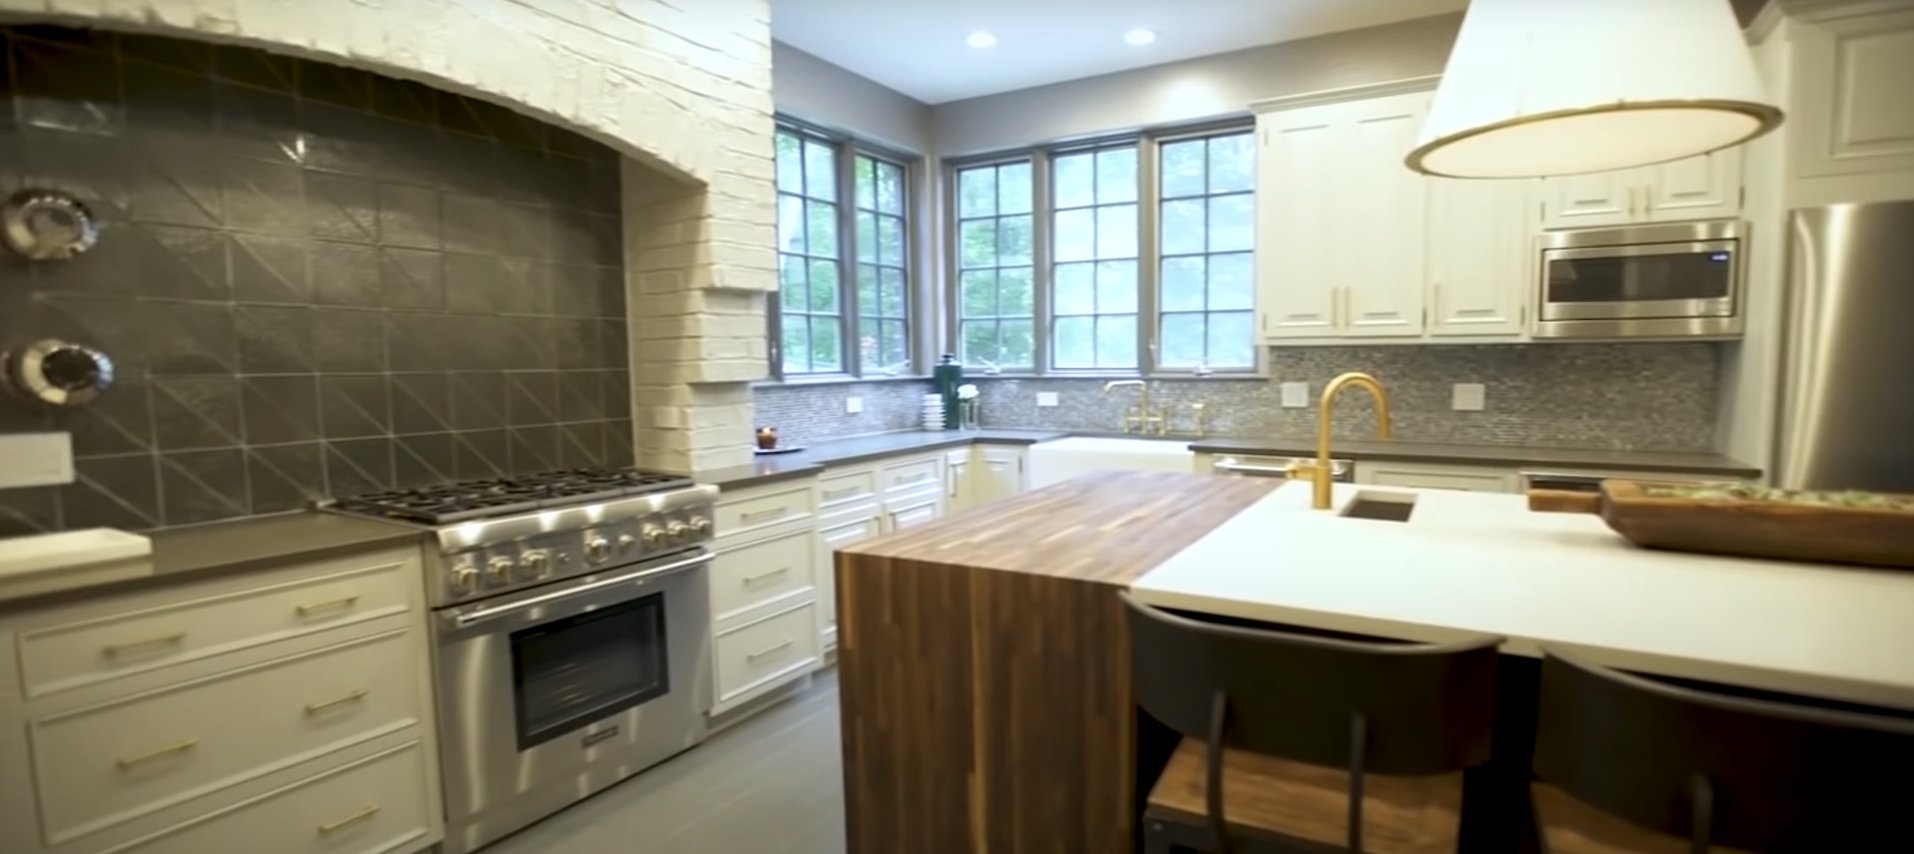 Picture of the interior kitchen design of Wahlberg and McCarthy's home | Photo: YouTube/People